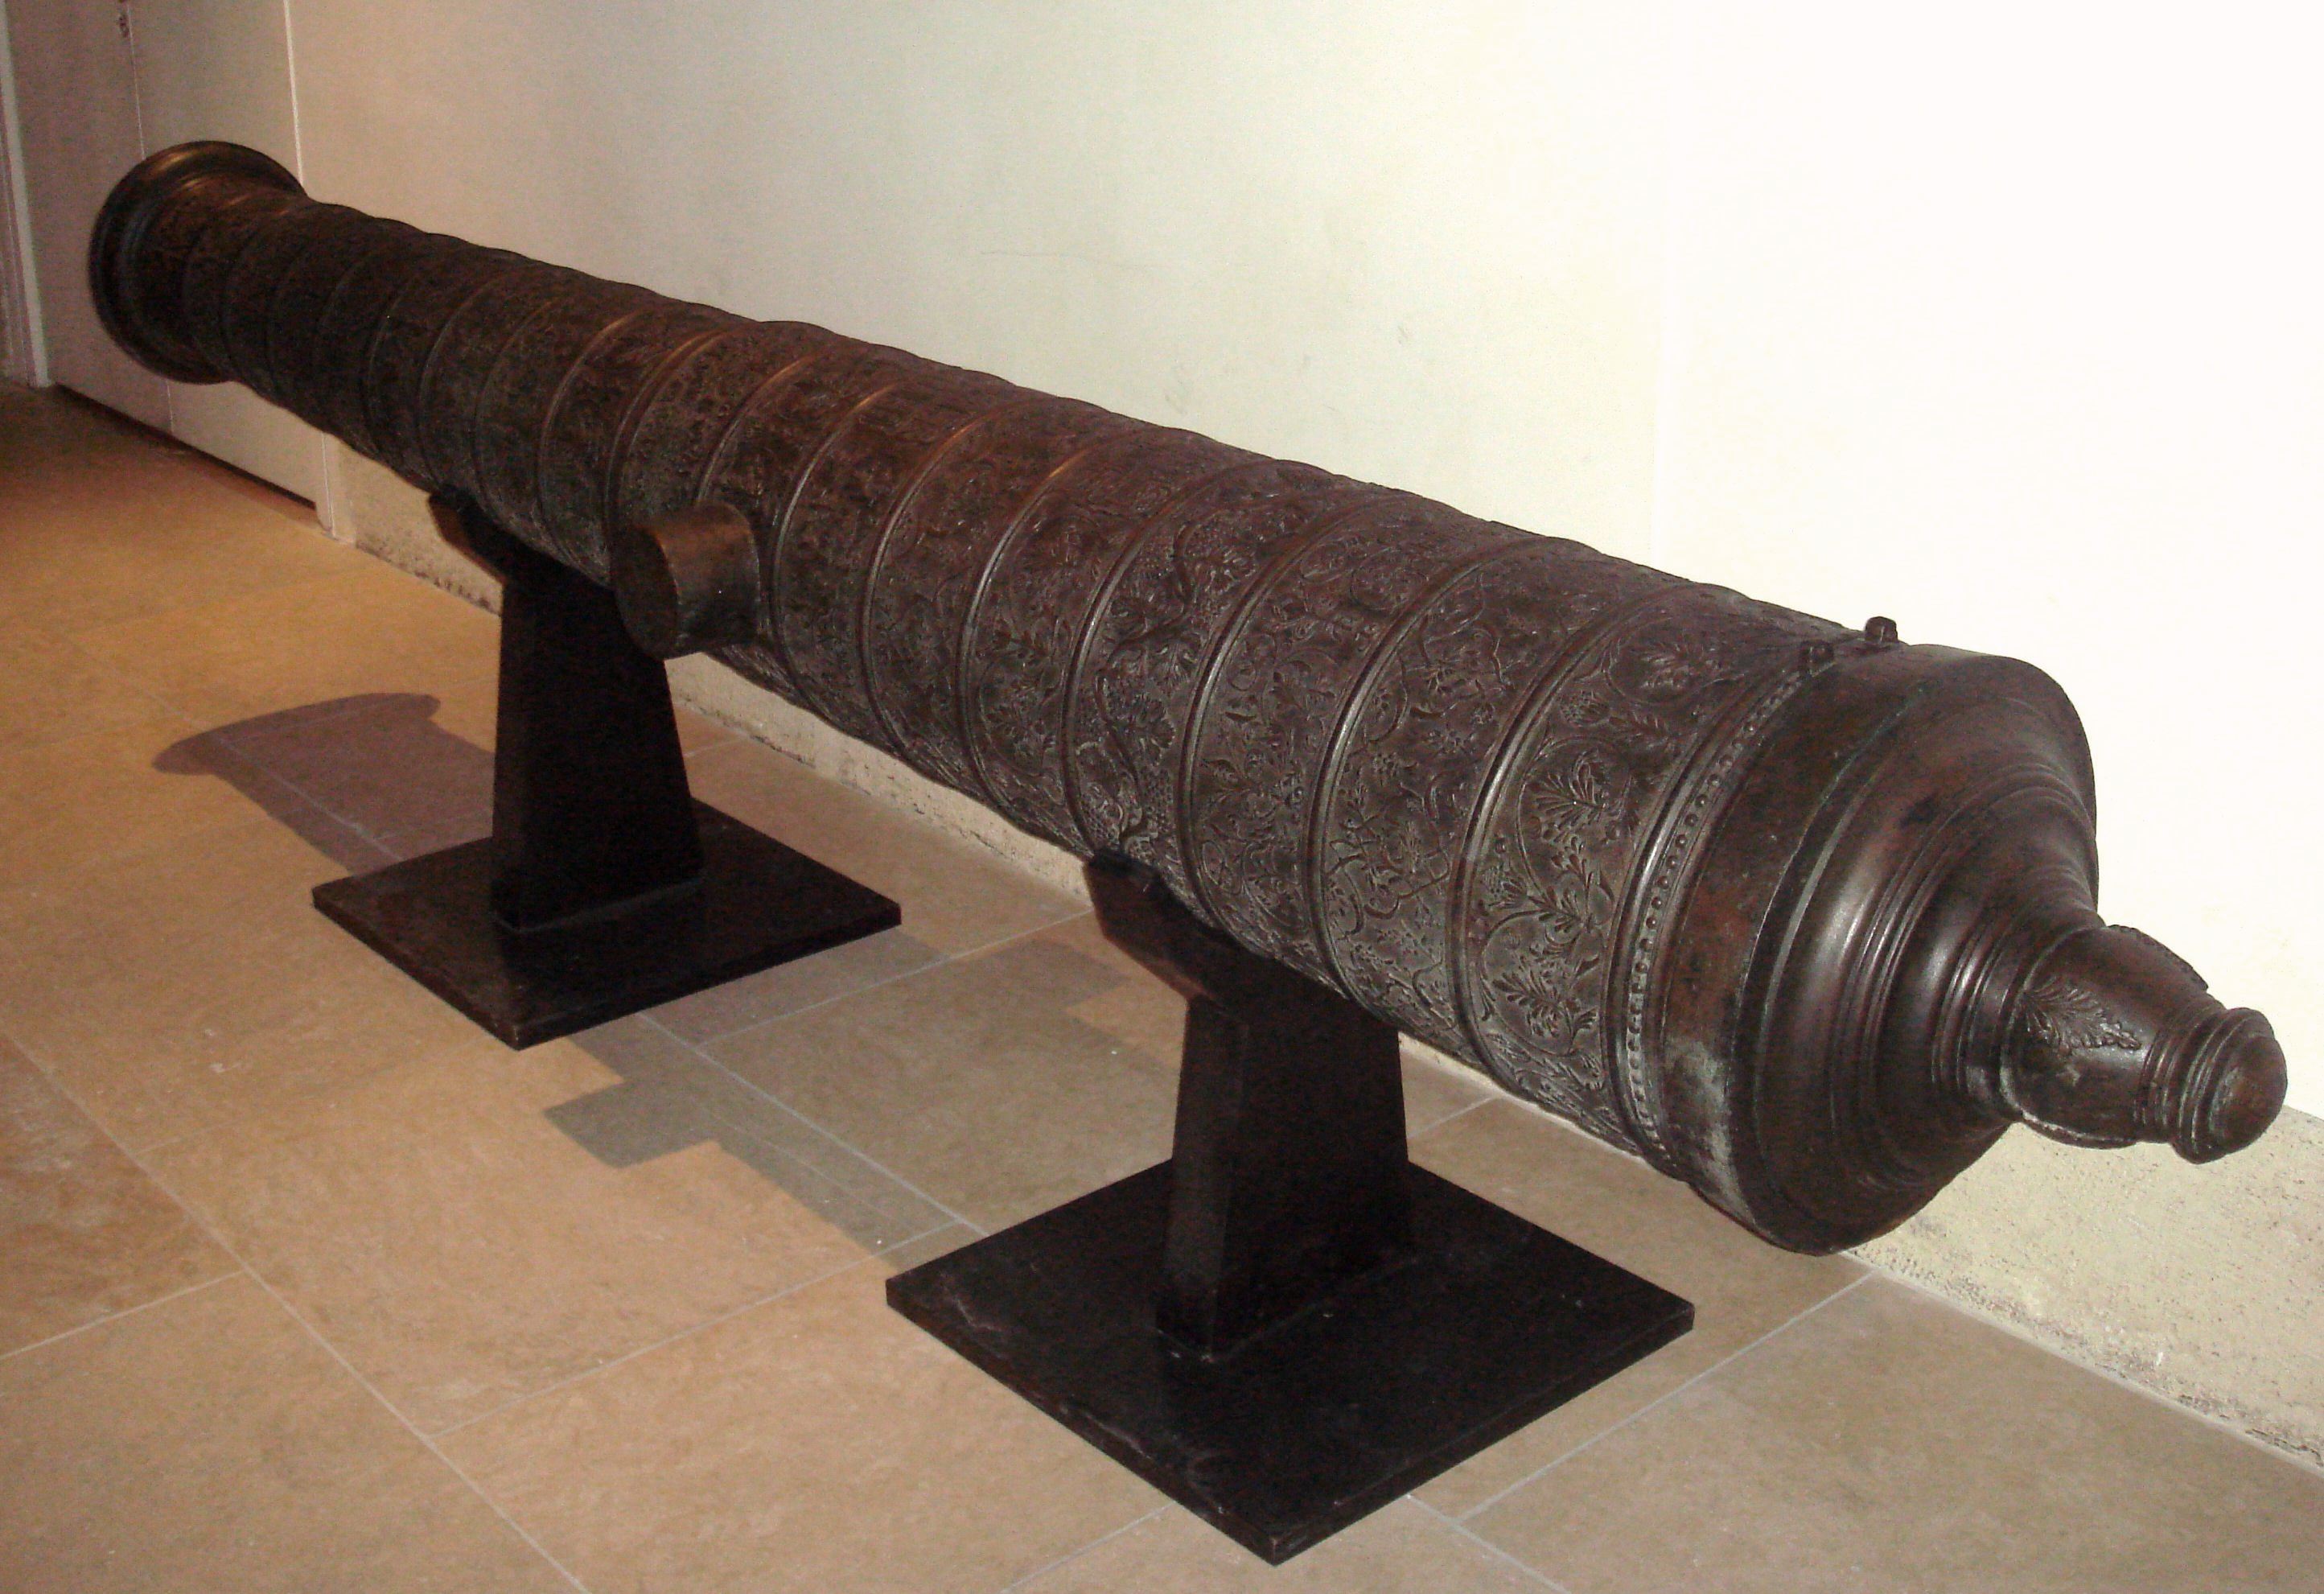 Ottoman_cannon_end_of_16th_century_length_385cm_cal_178mm_weight_2910_stone_projectile_founded_8_October_1581_Alger_seized_1830.jpg